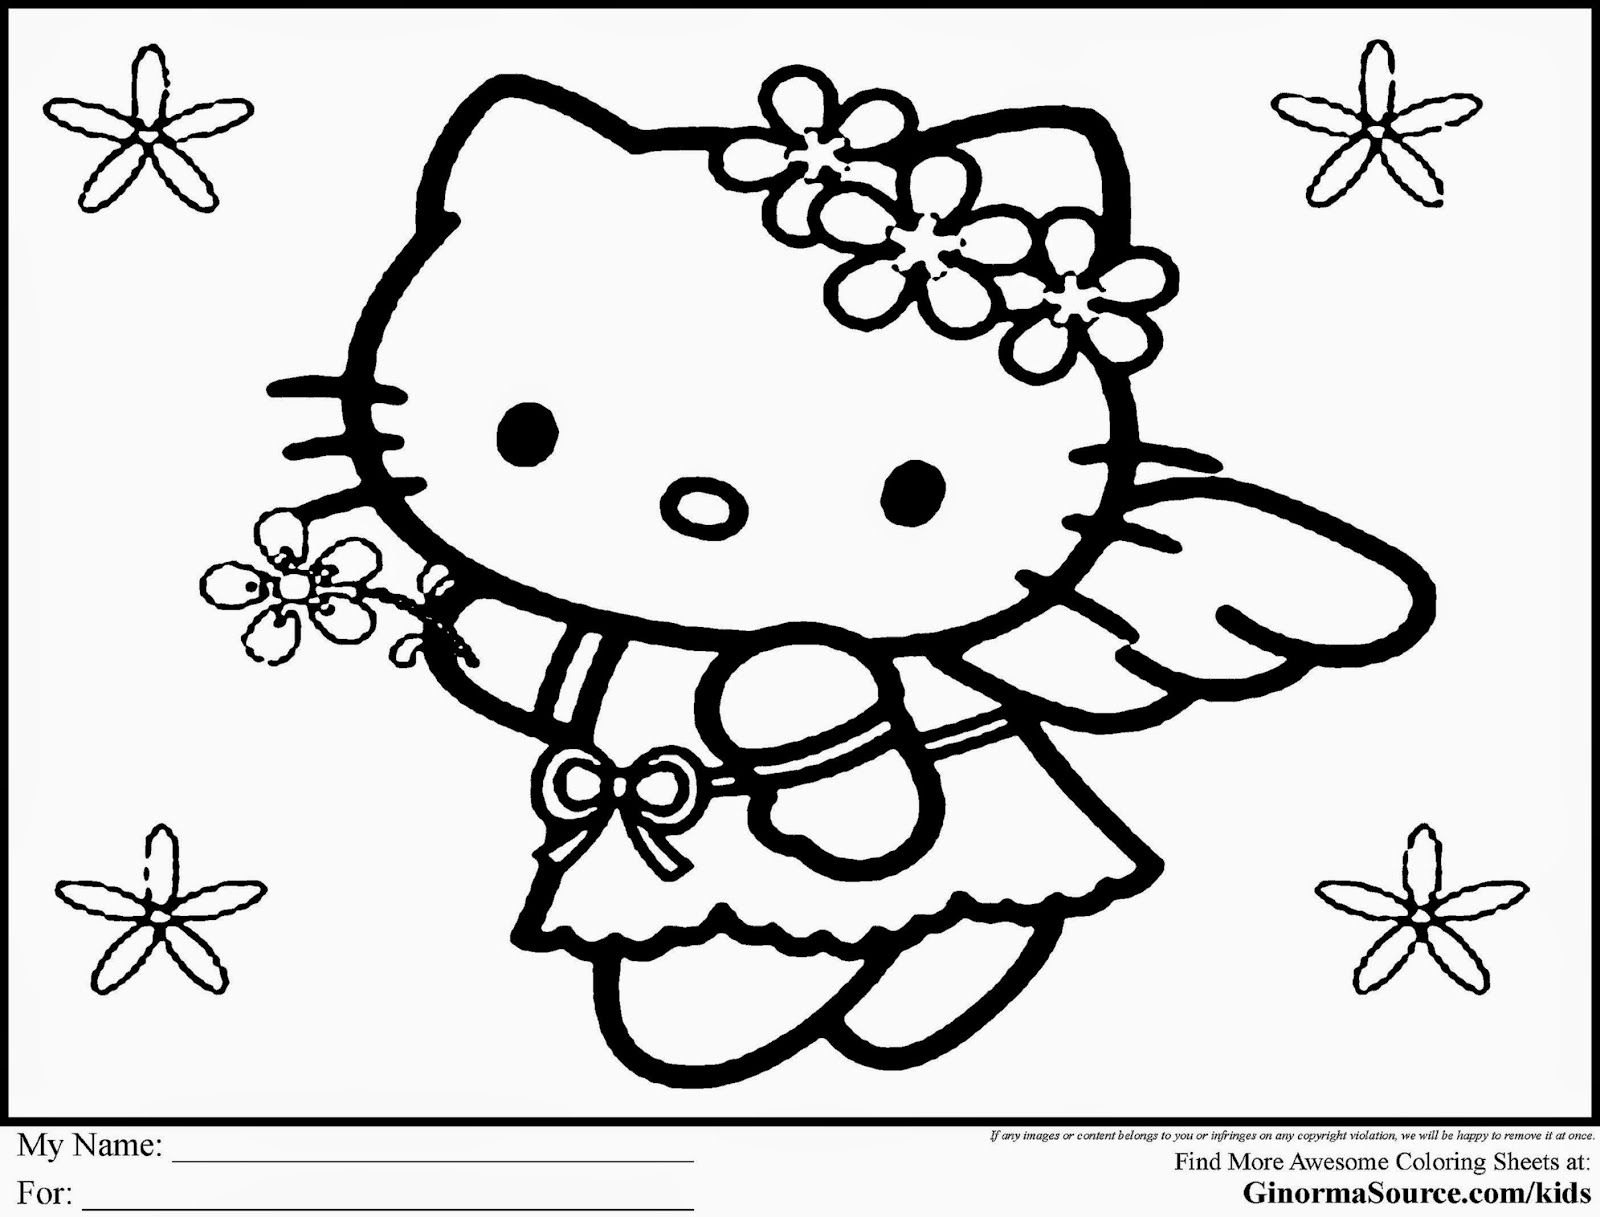 February 2015 | Free Coloring Sheet